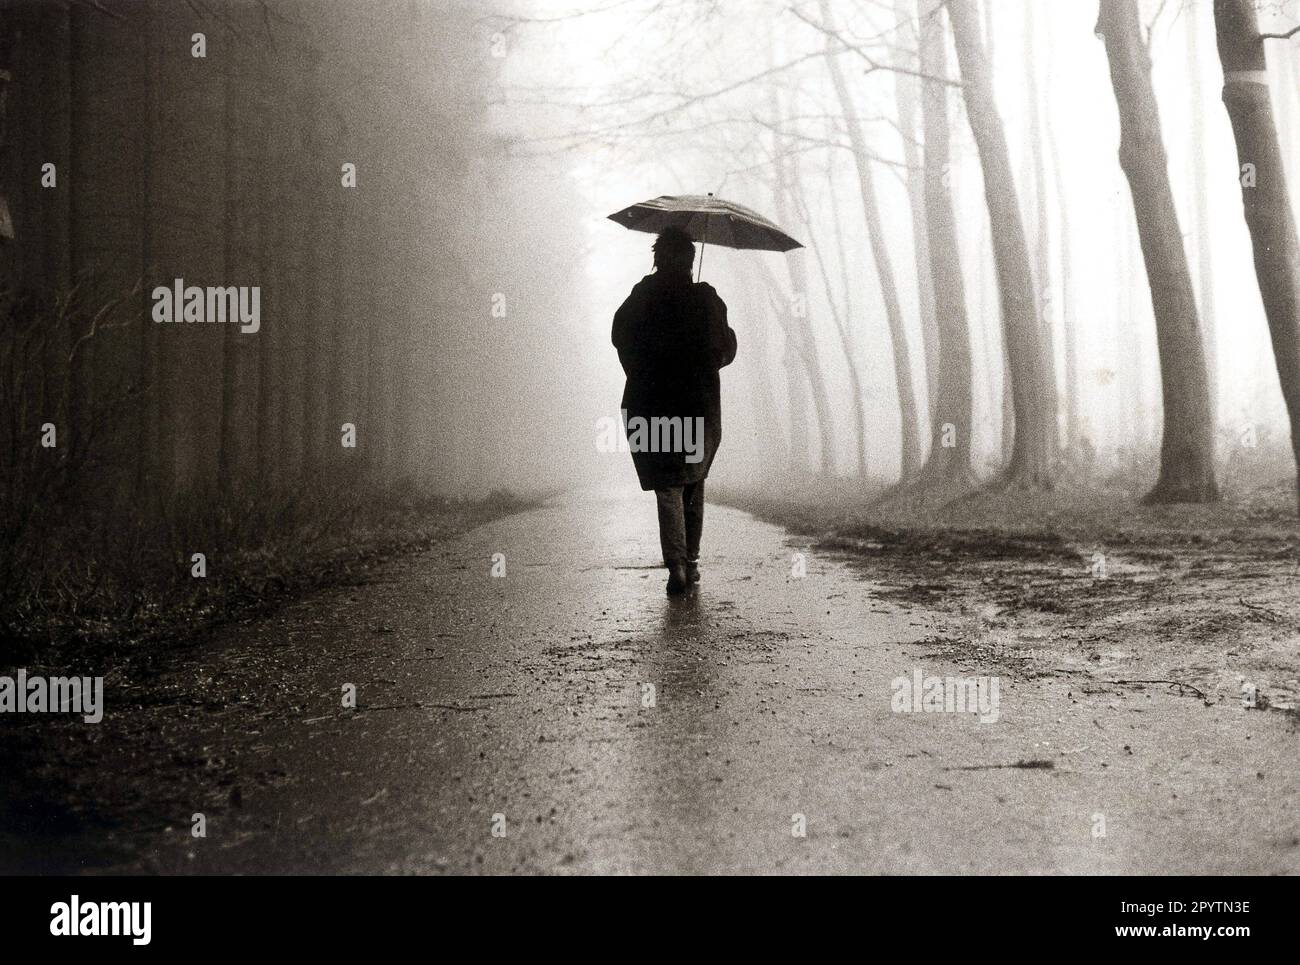 Winter day in the forest. A woman walks with an umbrella on a forest path through the dense fog. Silhouette against the light. Aachen, North Rhine-Westphalia, Germany, 01.11.1990 | Automated translation: winter day in the woods. A woman walks with an umbrella on a forest road through the thick fog. Silhouette in the backlight. Aachen, North Rhine-Westphalia, Germany, 01.11.1990 [automated translation] Stock Photo